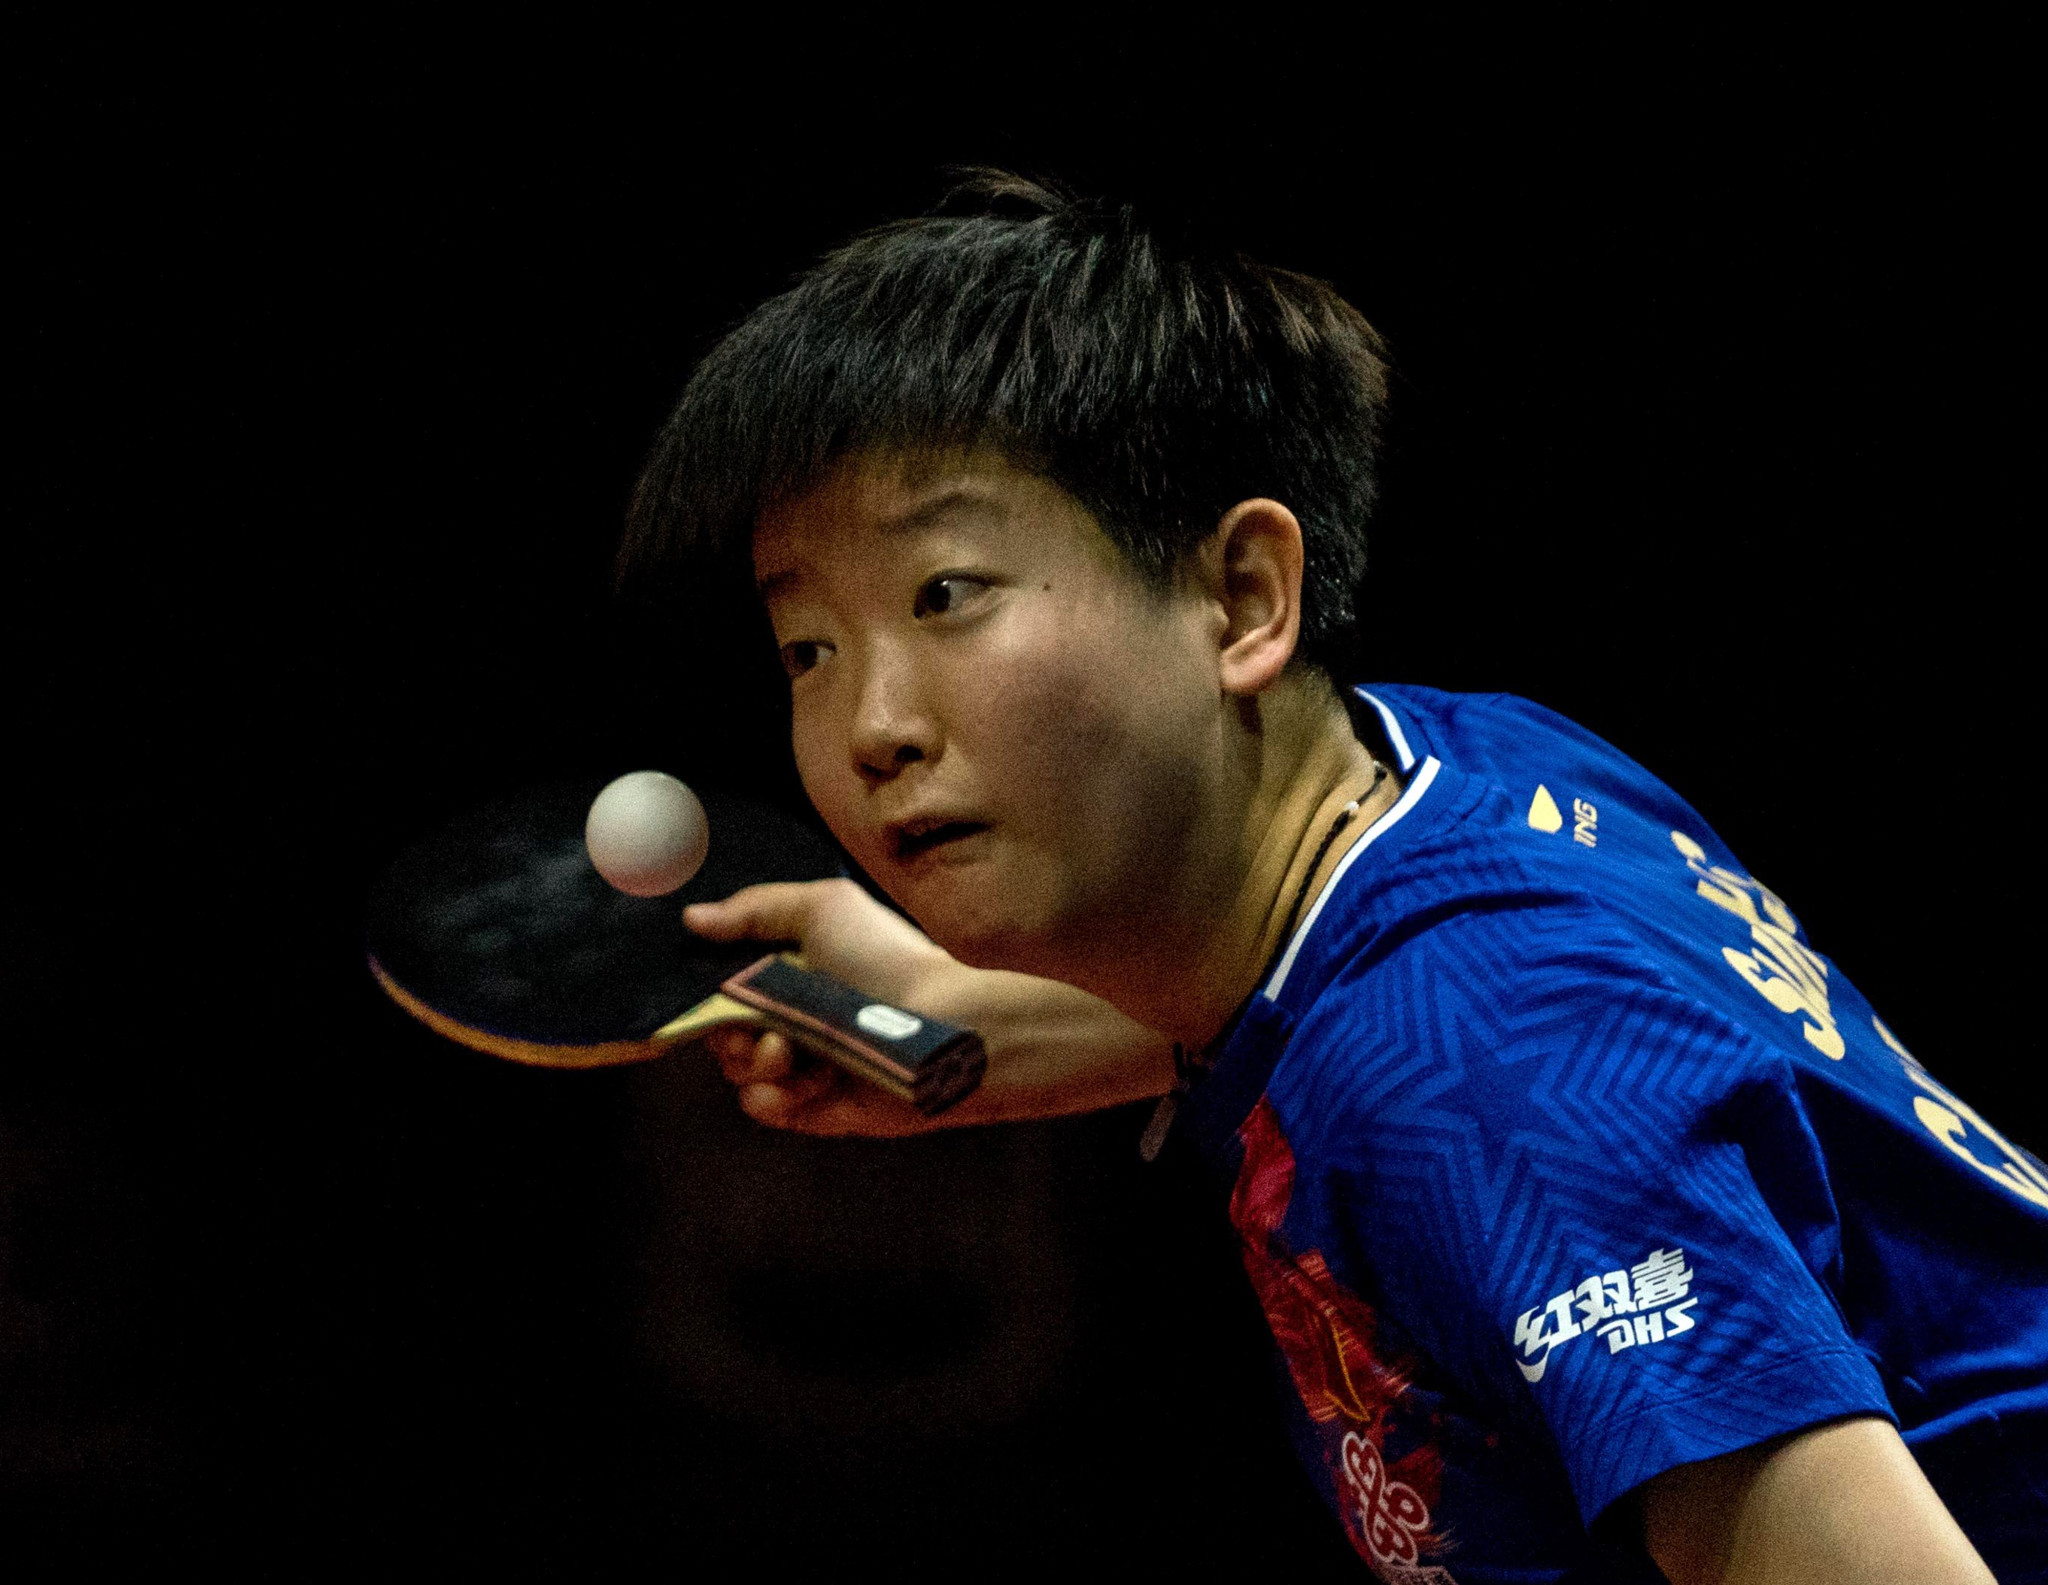 Sun Yingsha collects shock gold at Asian Table Tennis Championships